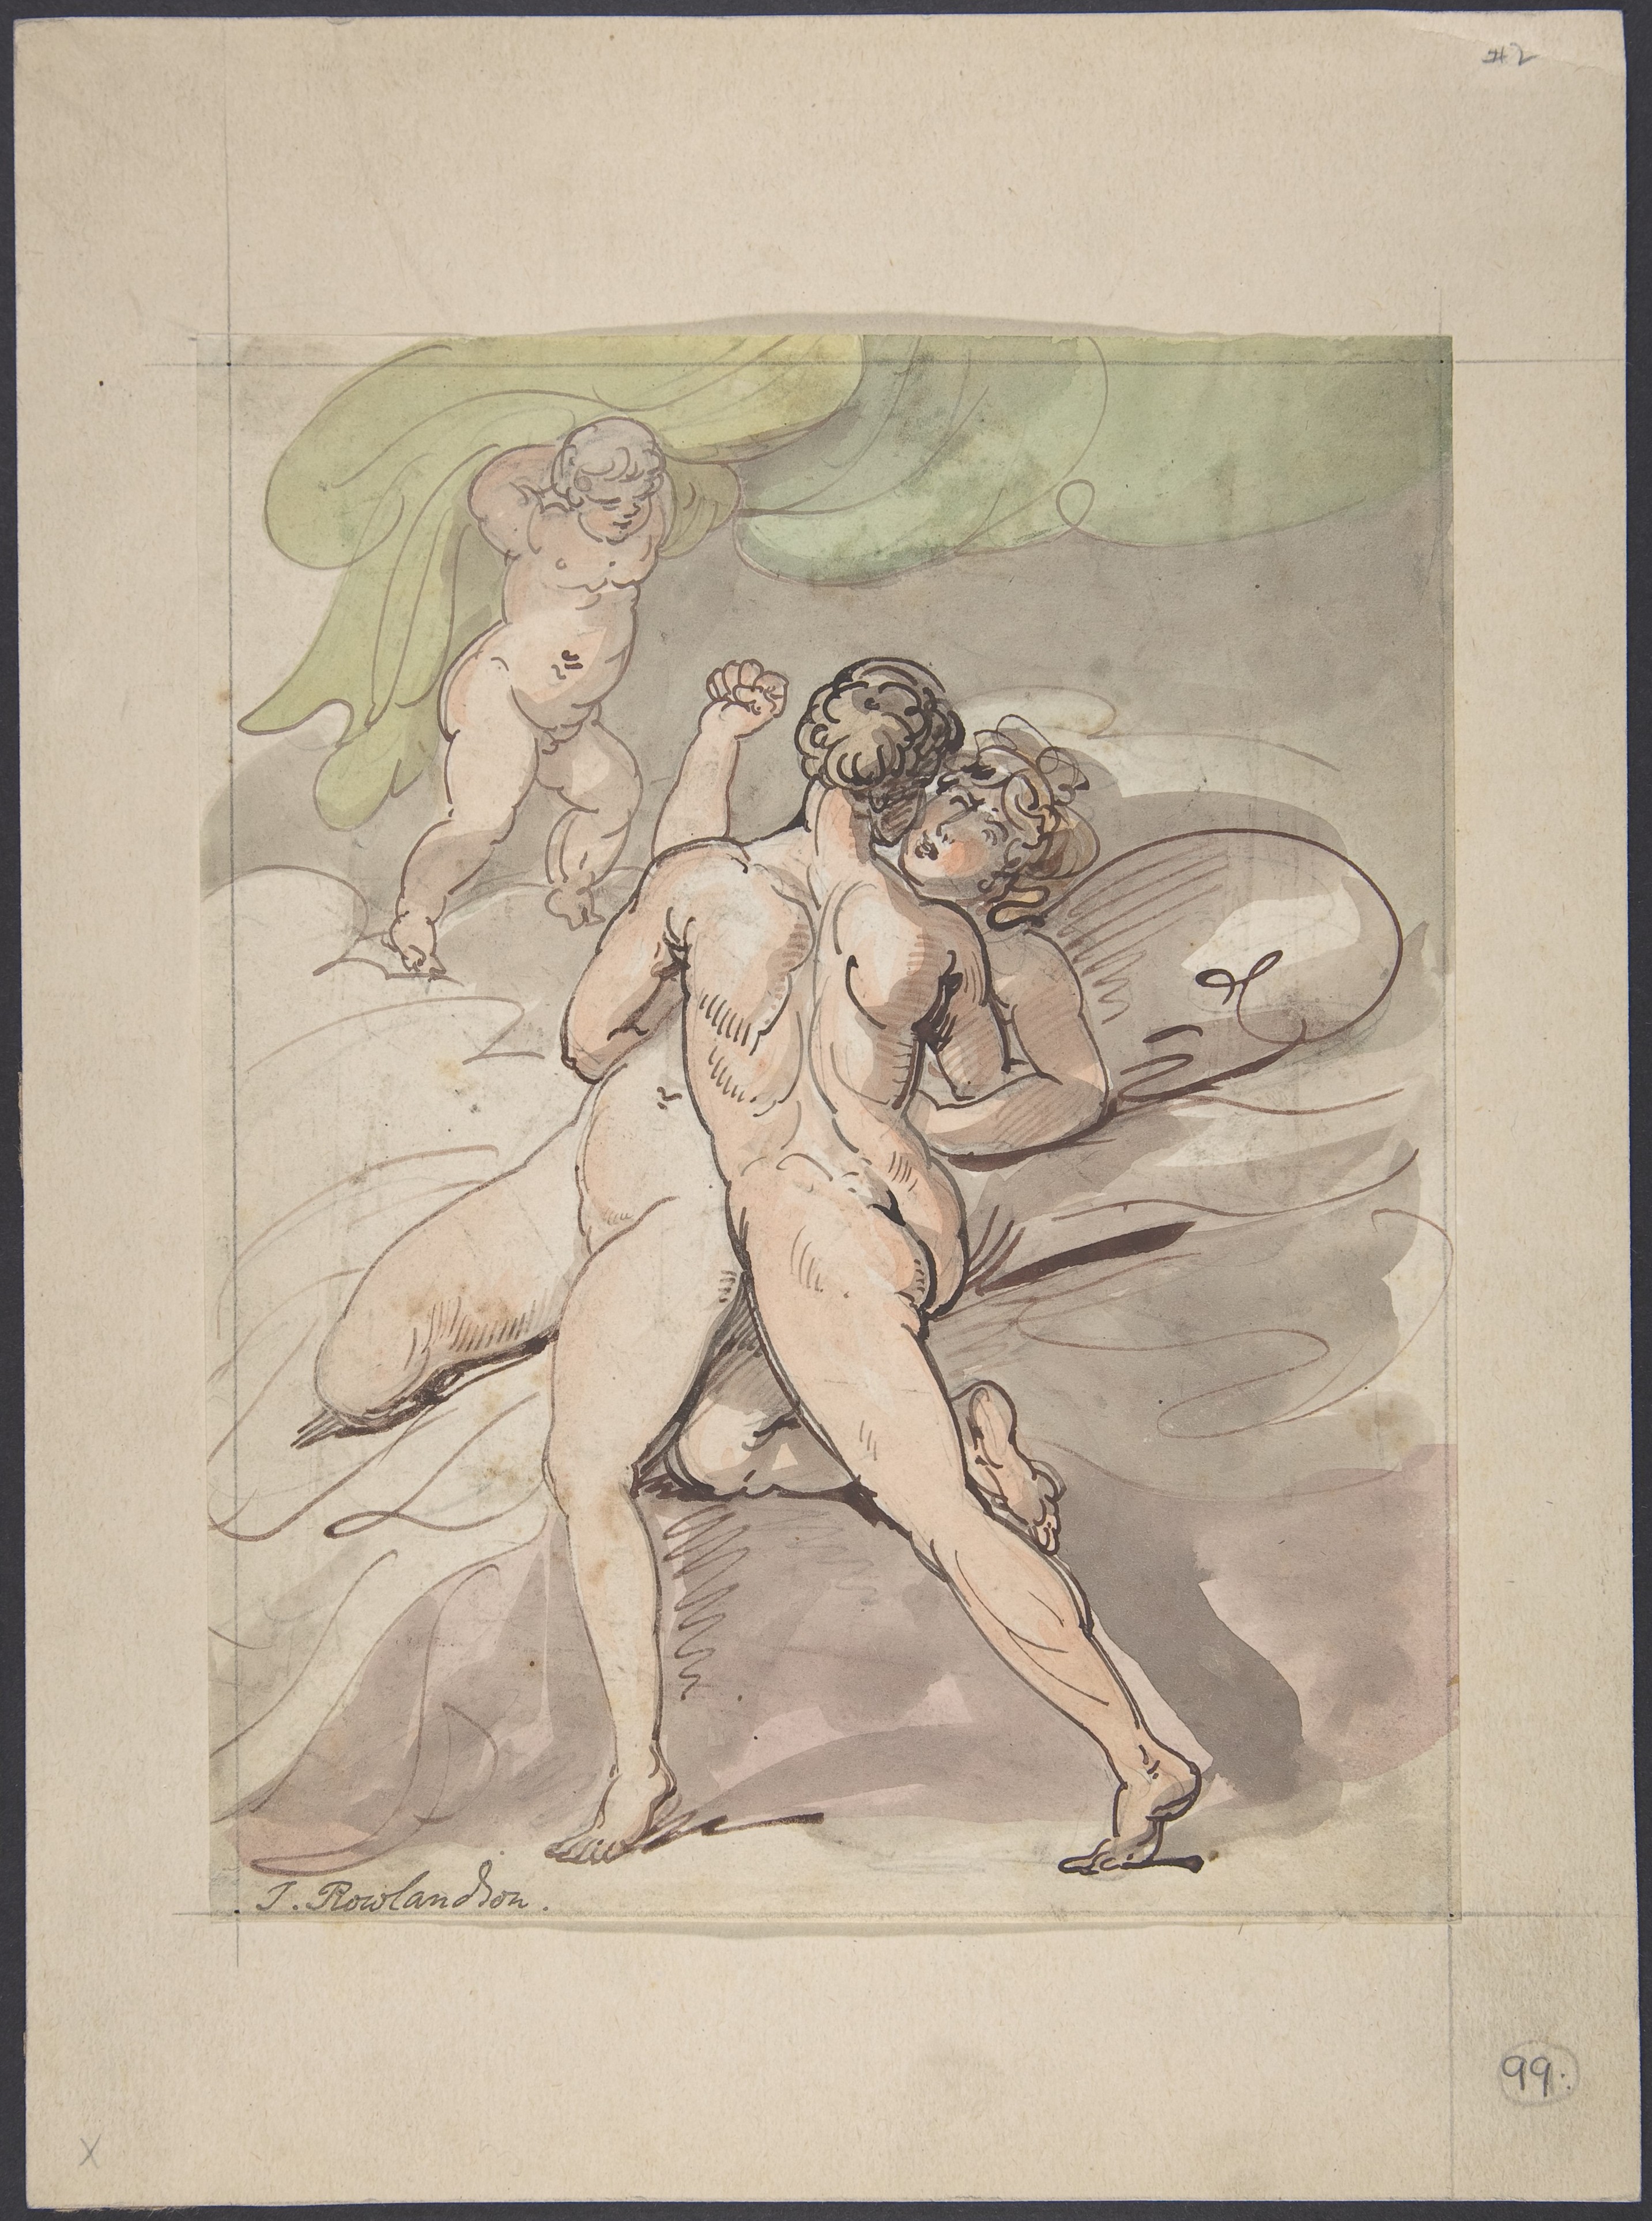 Thomas Rowlandson Artworks collected in Metmuseum